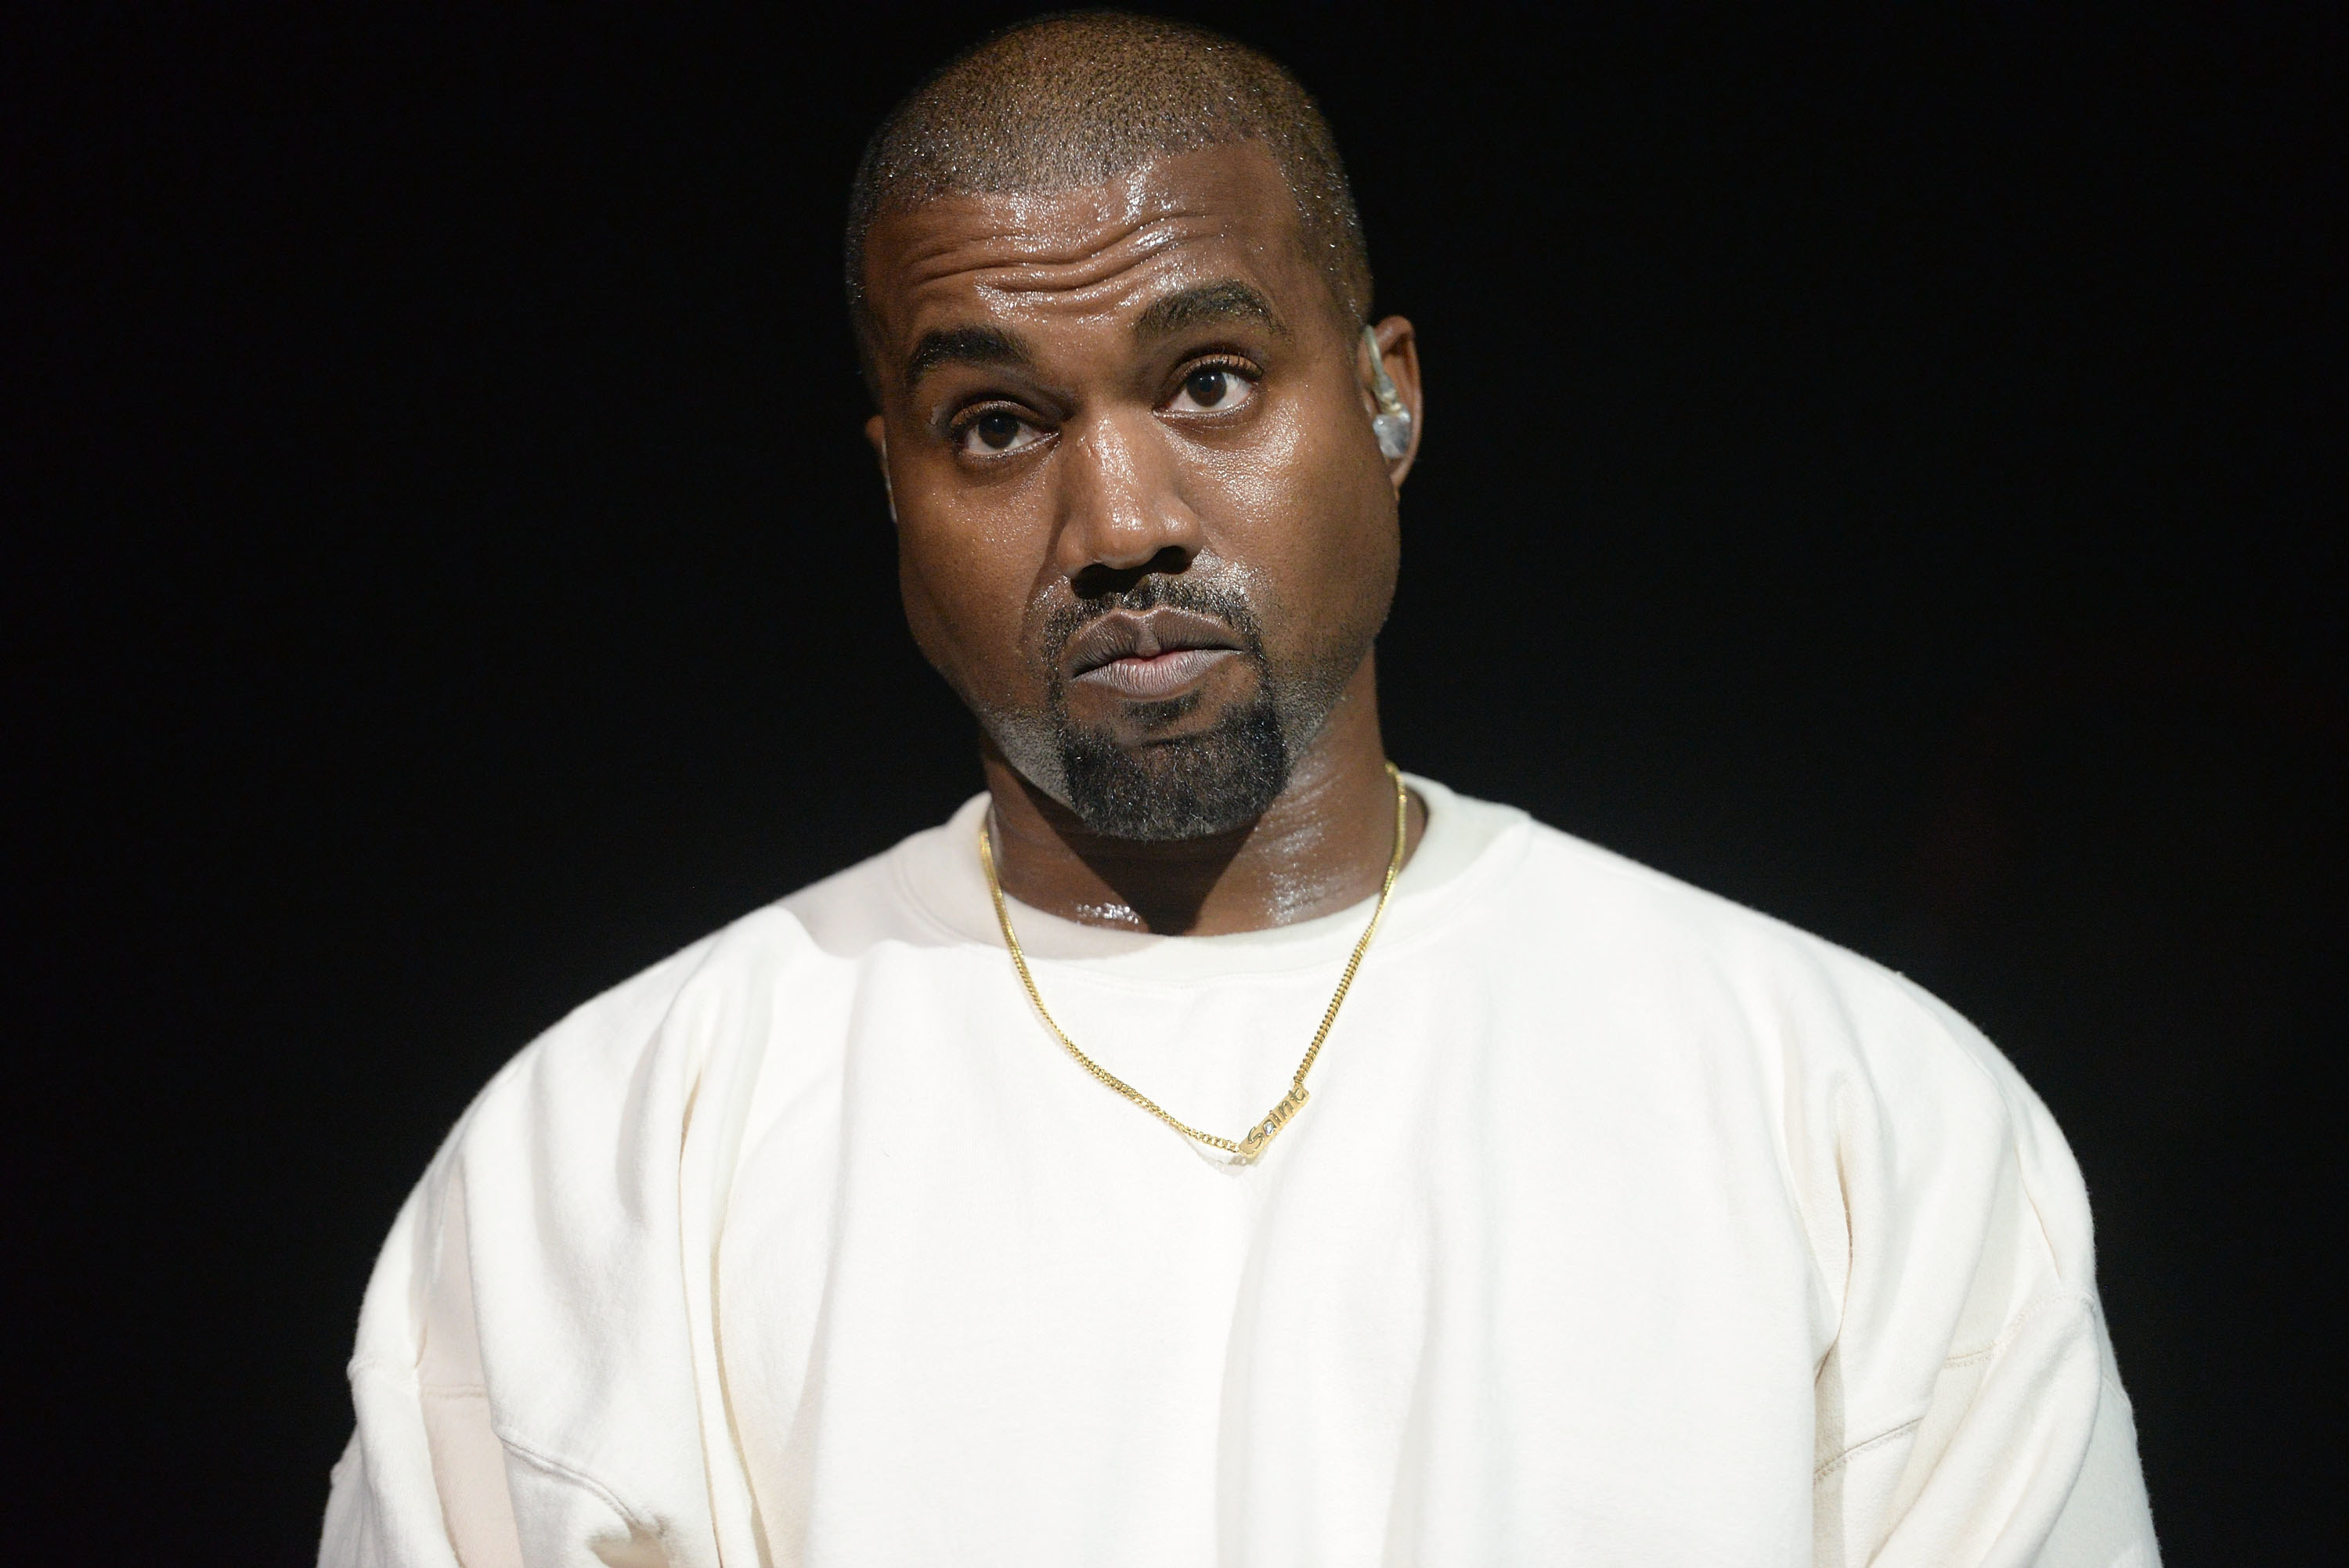 Kanye West Is Releasing Yeezy Crocs And The Internet's Reaction Is Hilarious